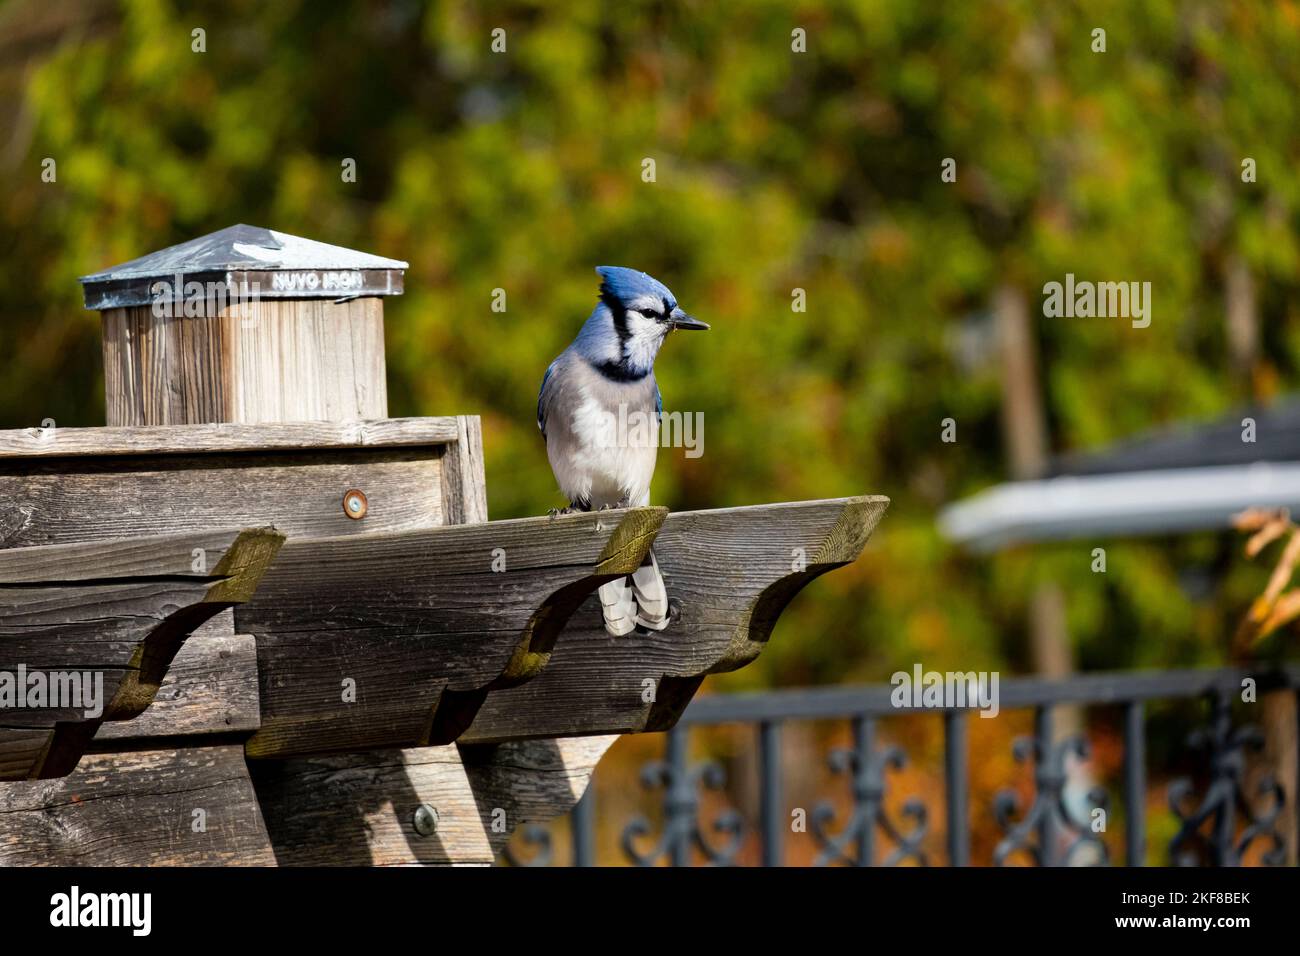 Blue jay perched watching the camera in early fall. Stock Photo